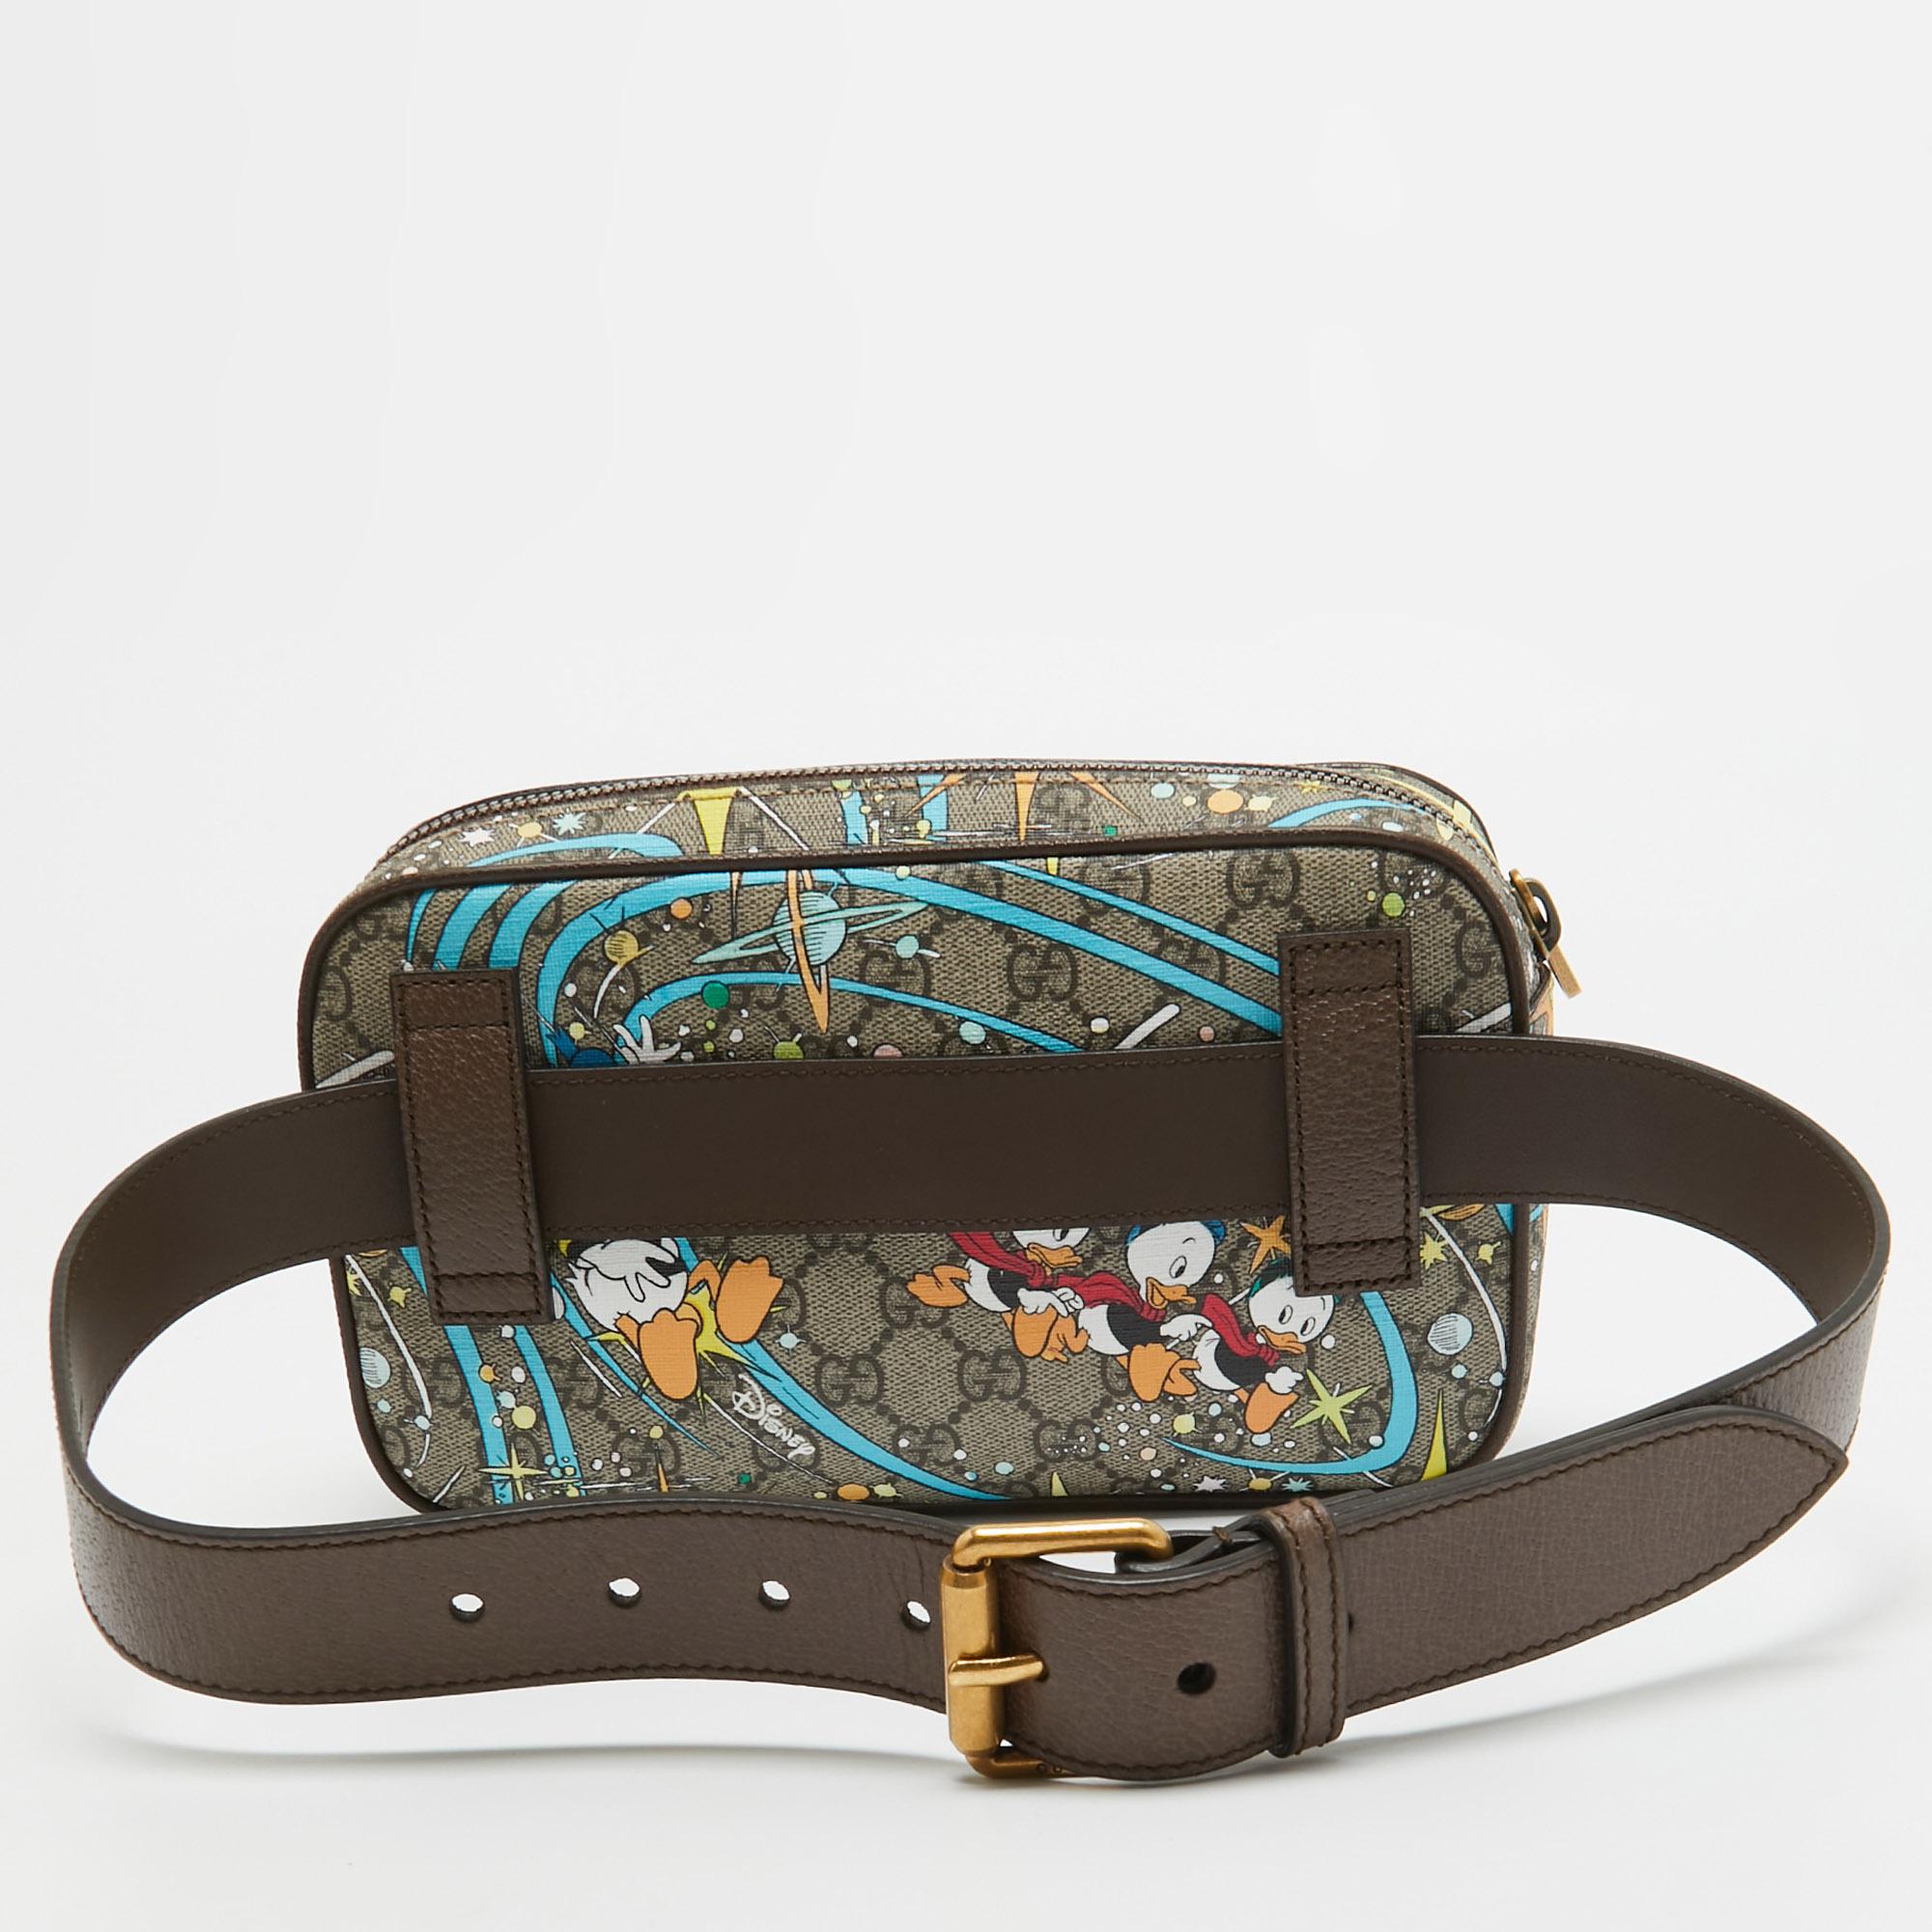 Waist bags are edgy, stylish and will never disappoint you when it comes to completing an outfit! This Gucci x Disney one is crafted wonderfully with a smart exterior, a compact, well-lined interior, and an adjustable belt that sits perfectly on